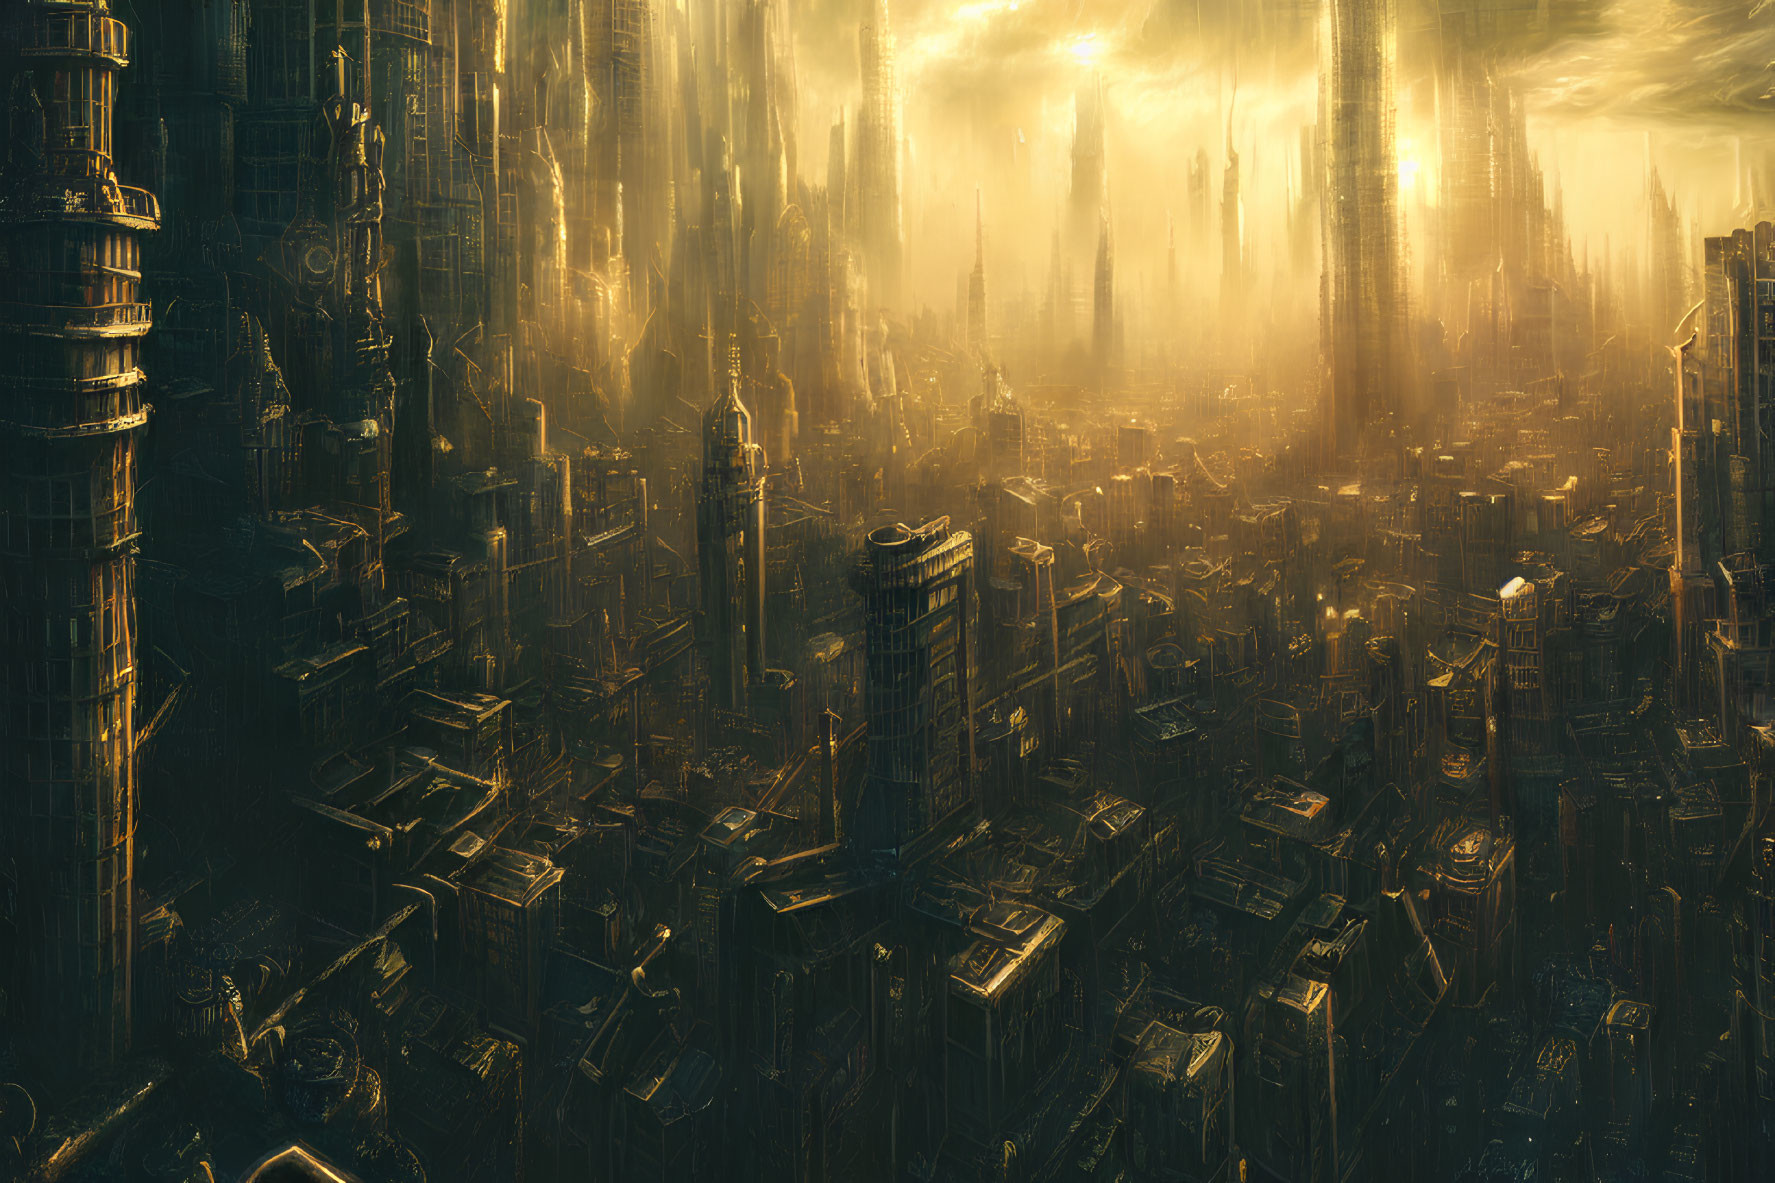 Futuristic cityscape with towering skyscrapers in golden light